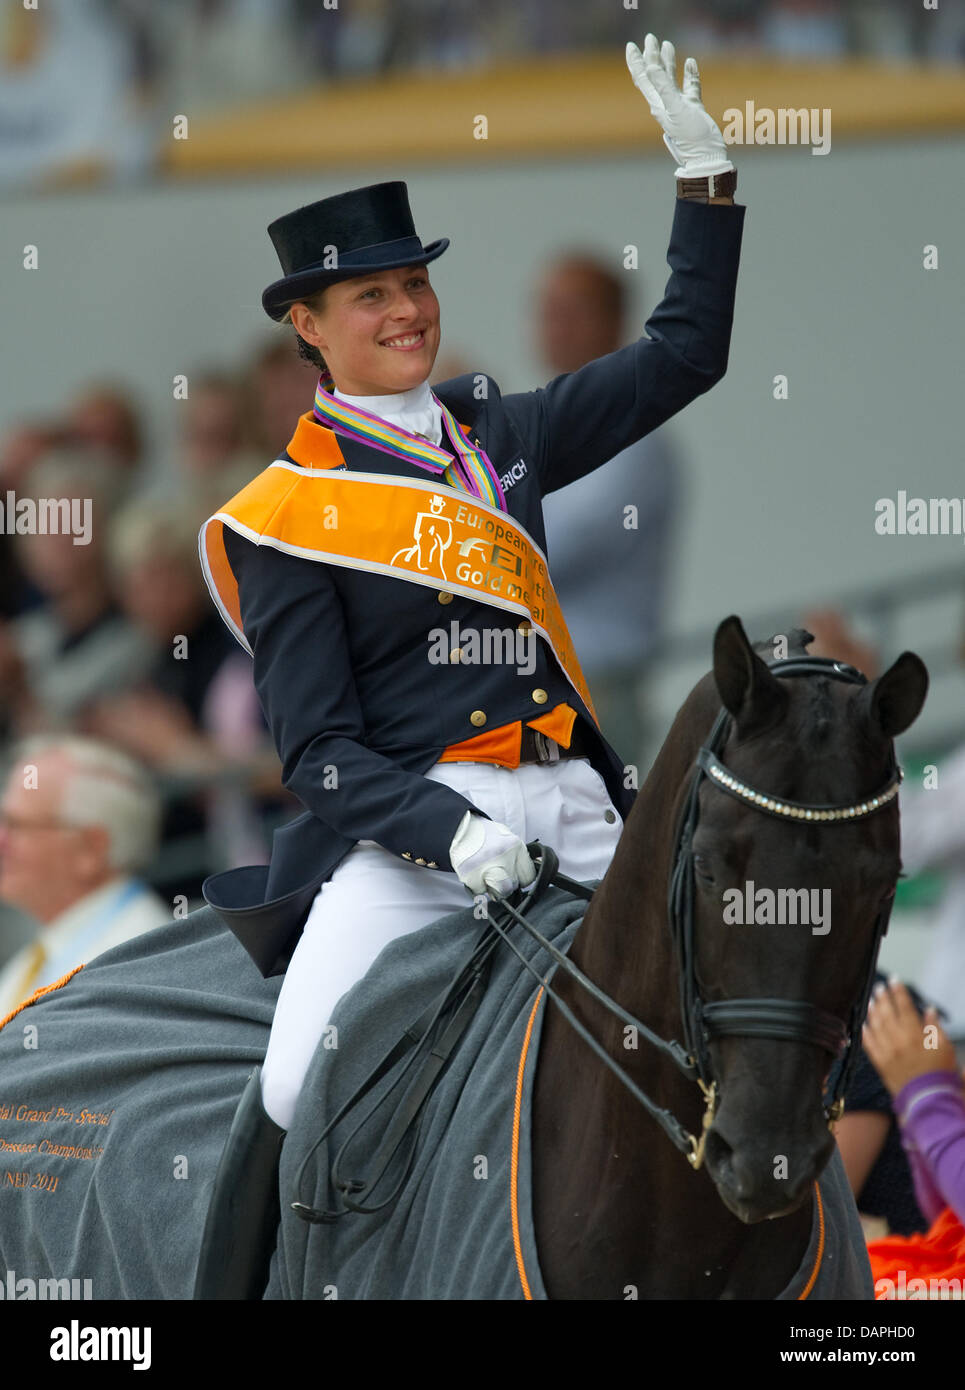 Dutch equestrian Adelinde Cornelissen smiles and waves on her horse Jerich Parzival during the award ceremony of the Grand Prix Special at the European Dressage Championship in Rotterdam, Netherlands, 20 August 2011. Cornelissen took first place. Photo: Uwe Anspach Stock Photo